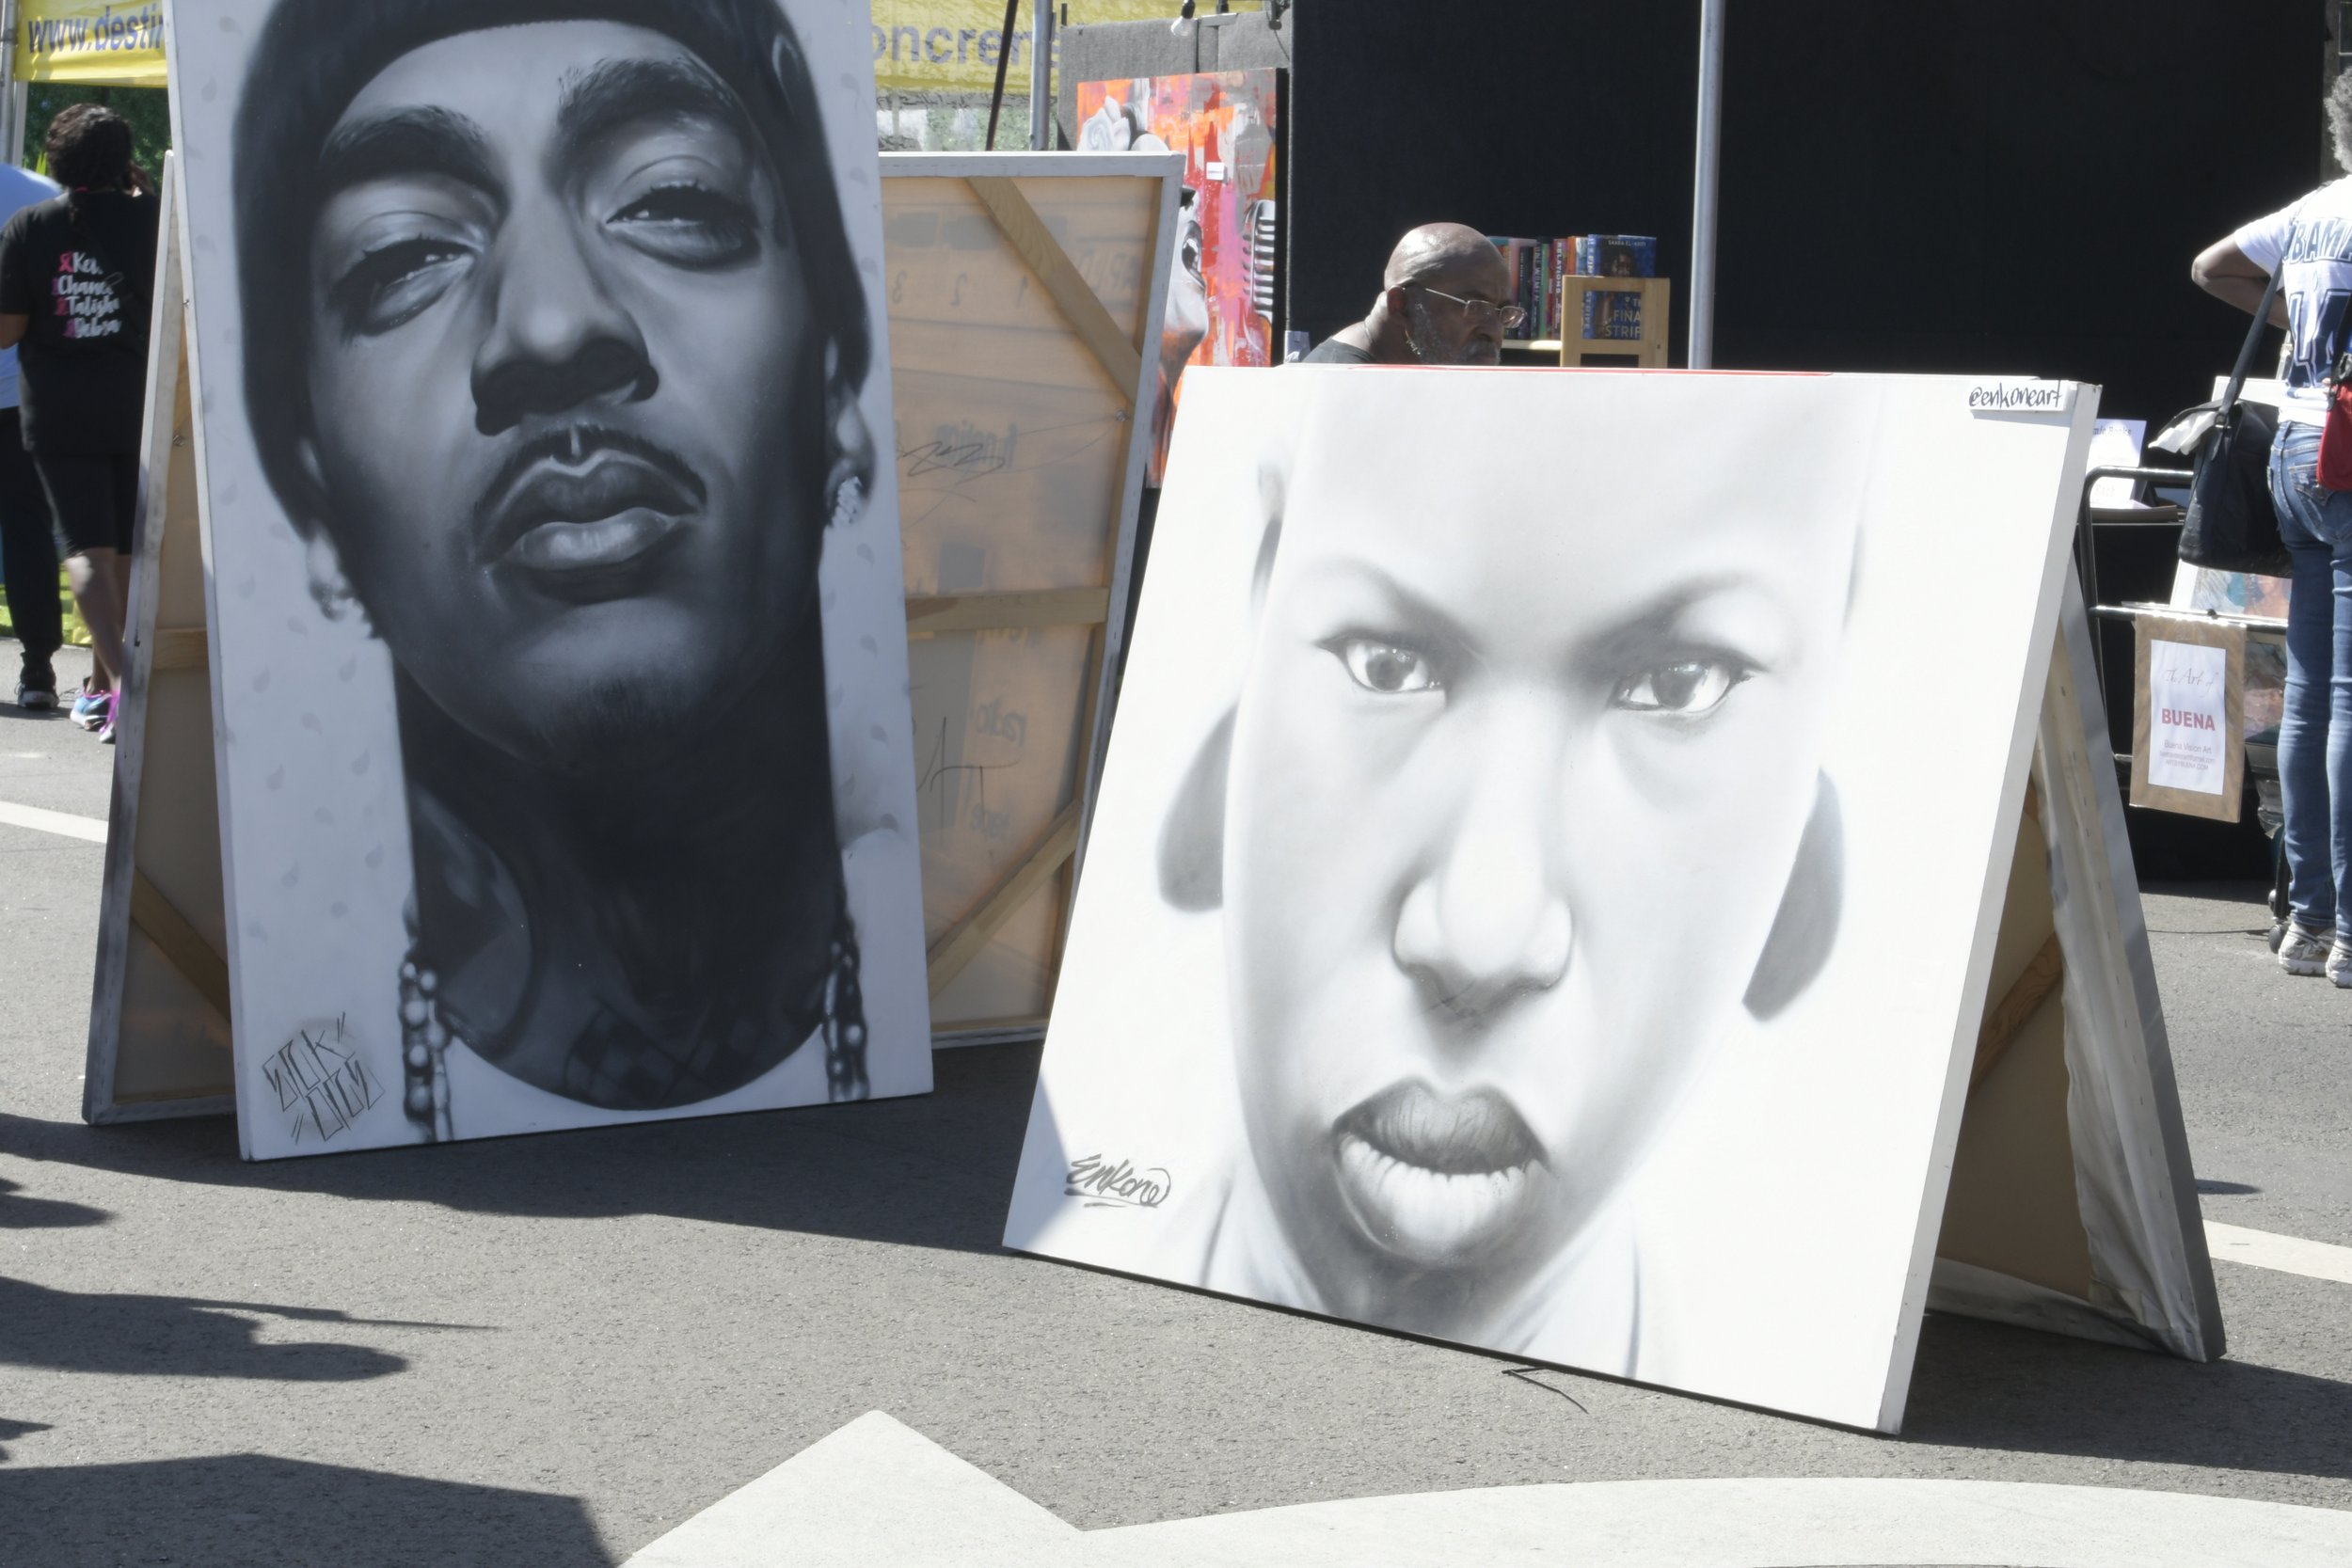  Paintings on display for sale at the Taste of Soul festival, giving people an opportunity to take a piece of art home with them. (Mikey Duro | The Corsair) 